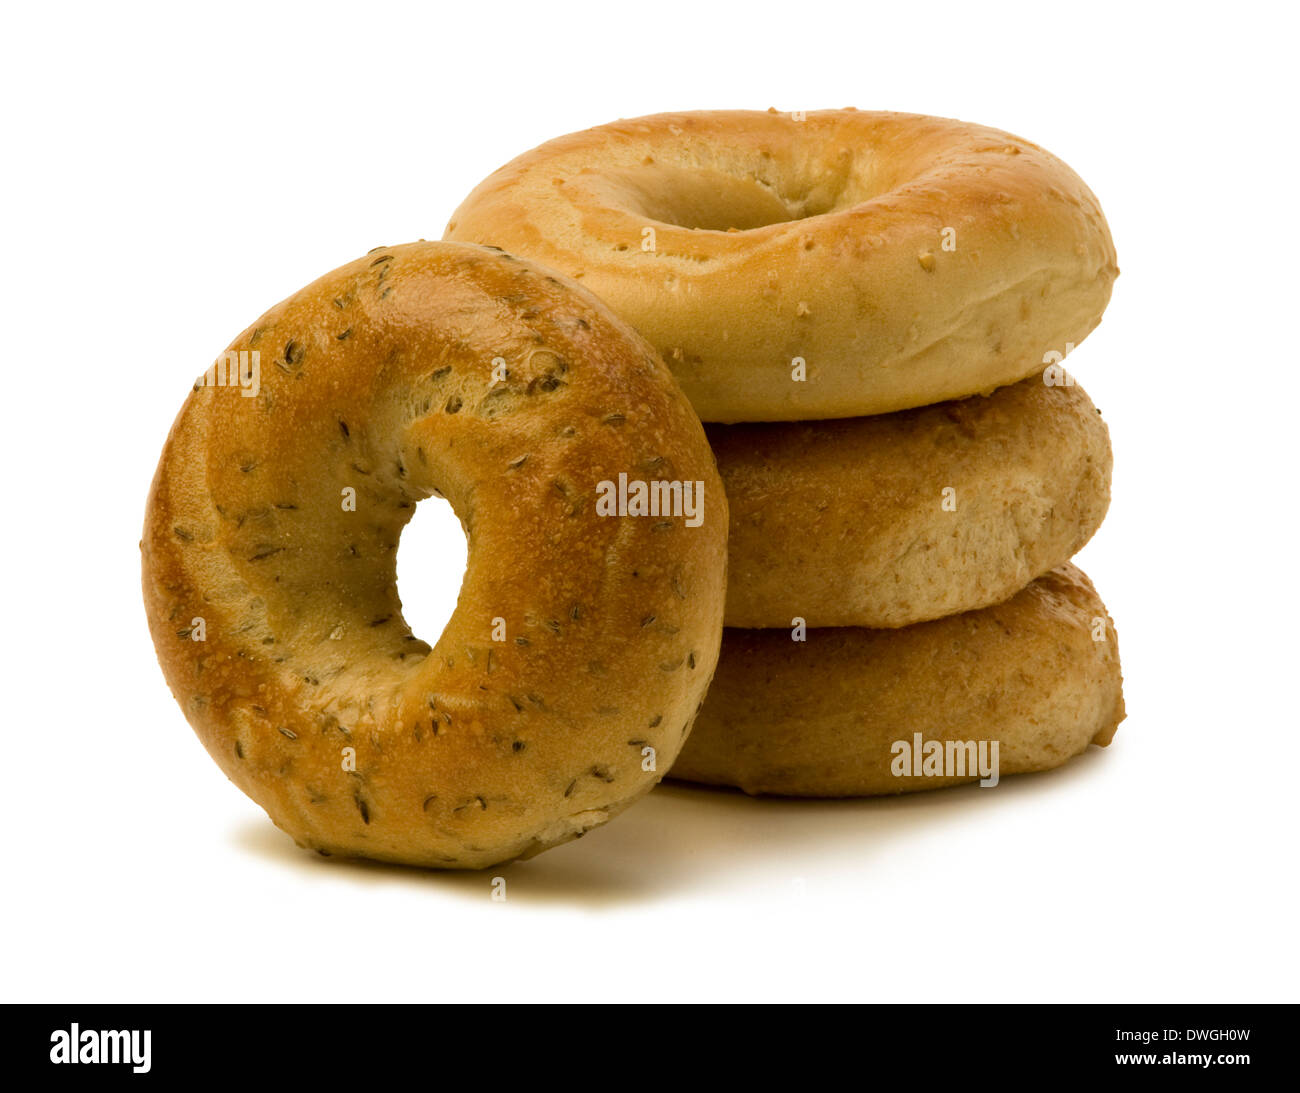 Stack of three bagels with one leaning on the side against white background. Stock Photo